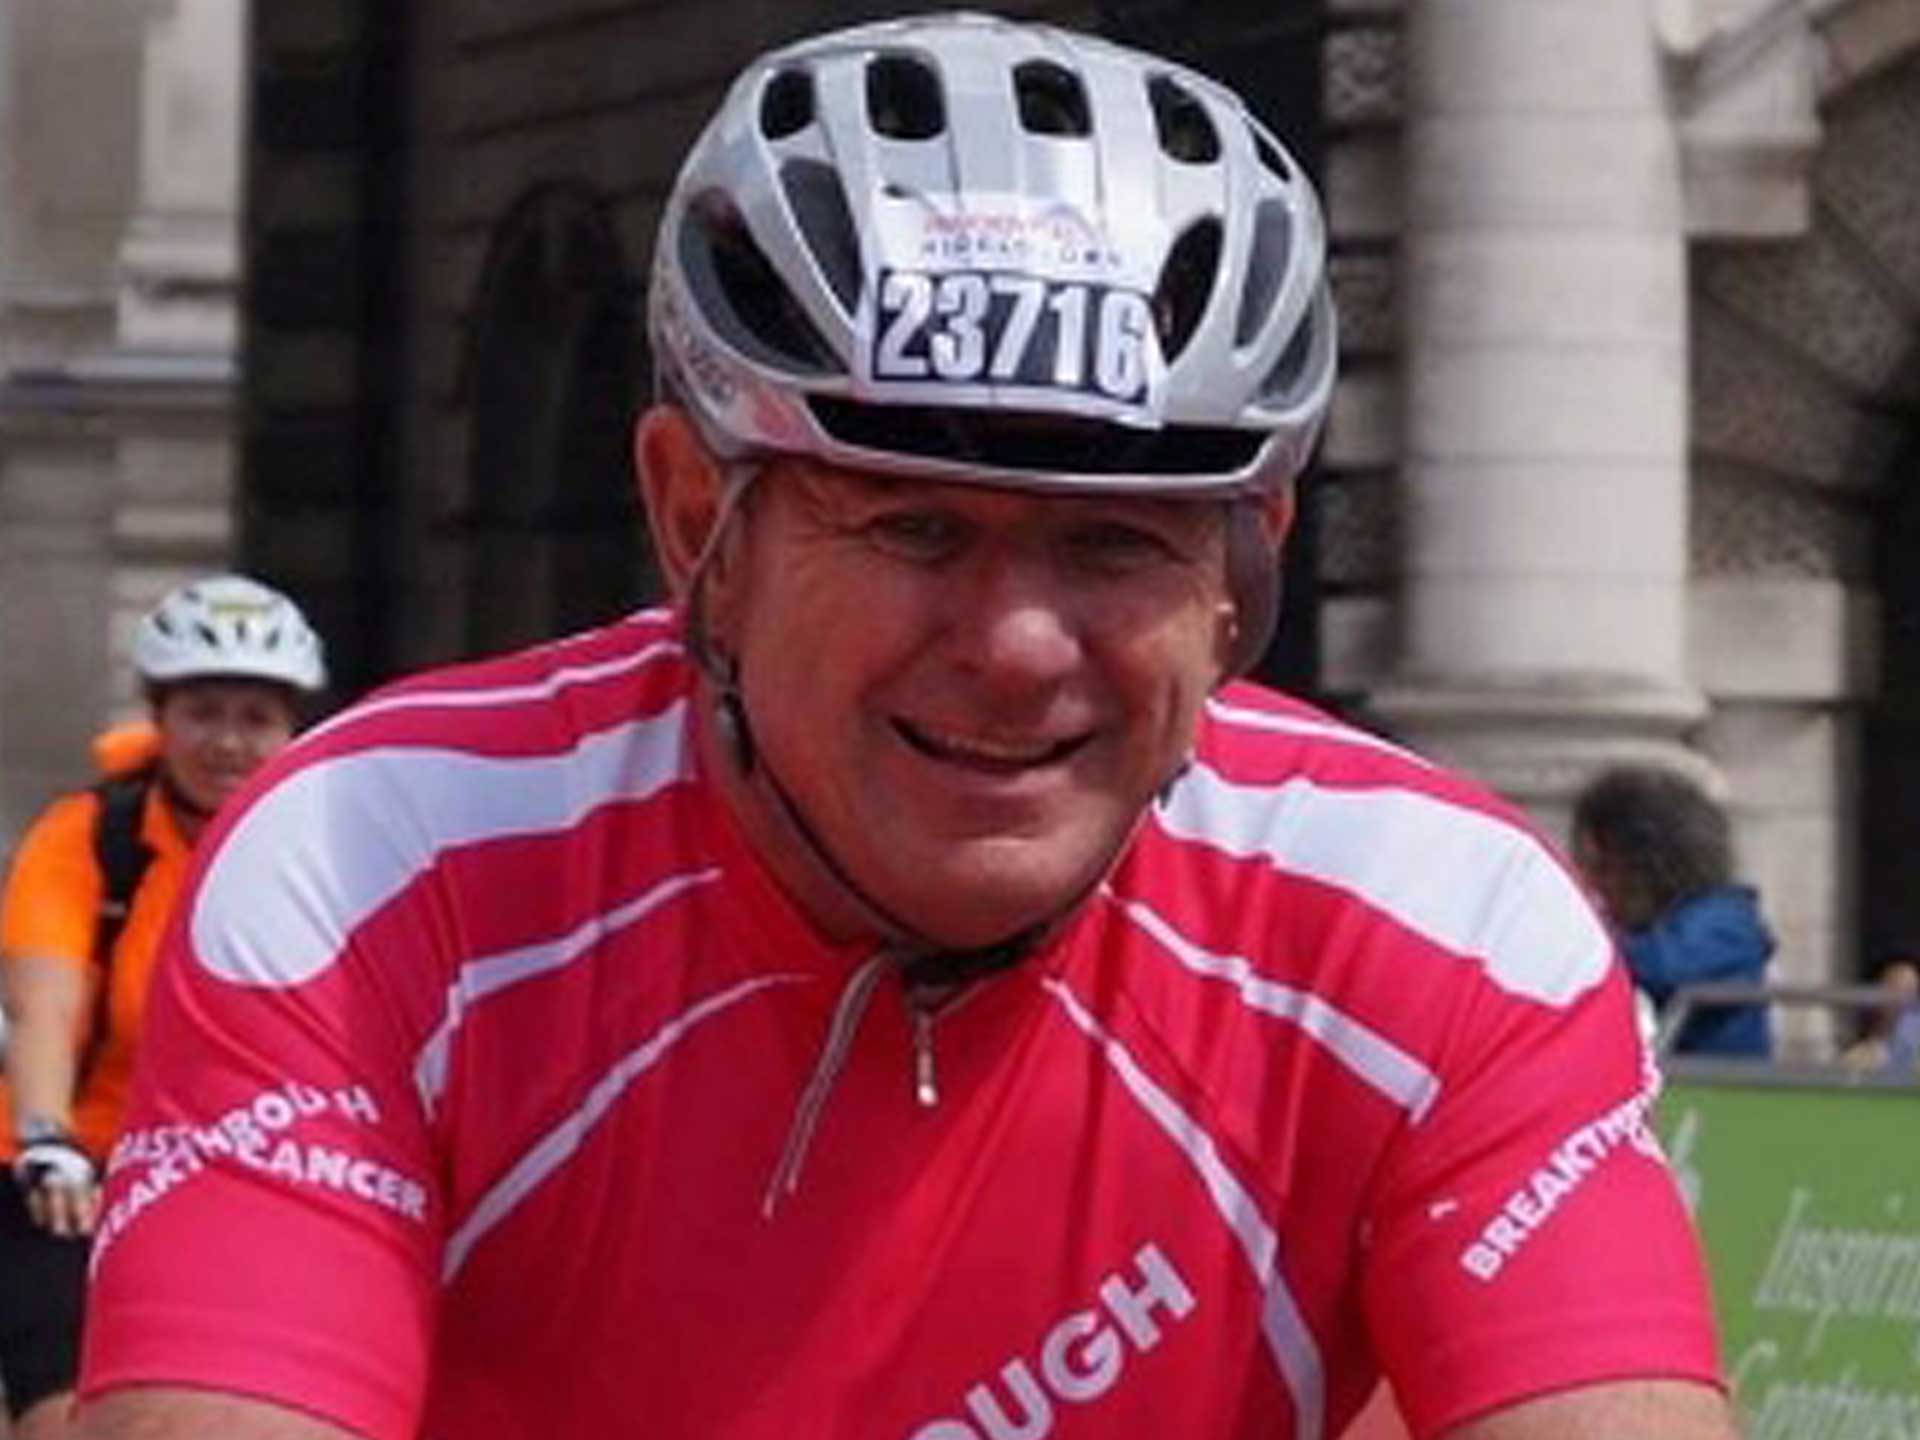 Company Chairman rides for Breast Cancer